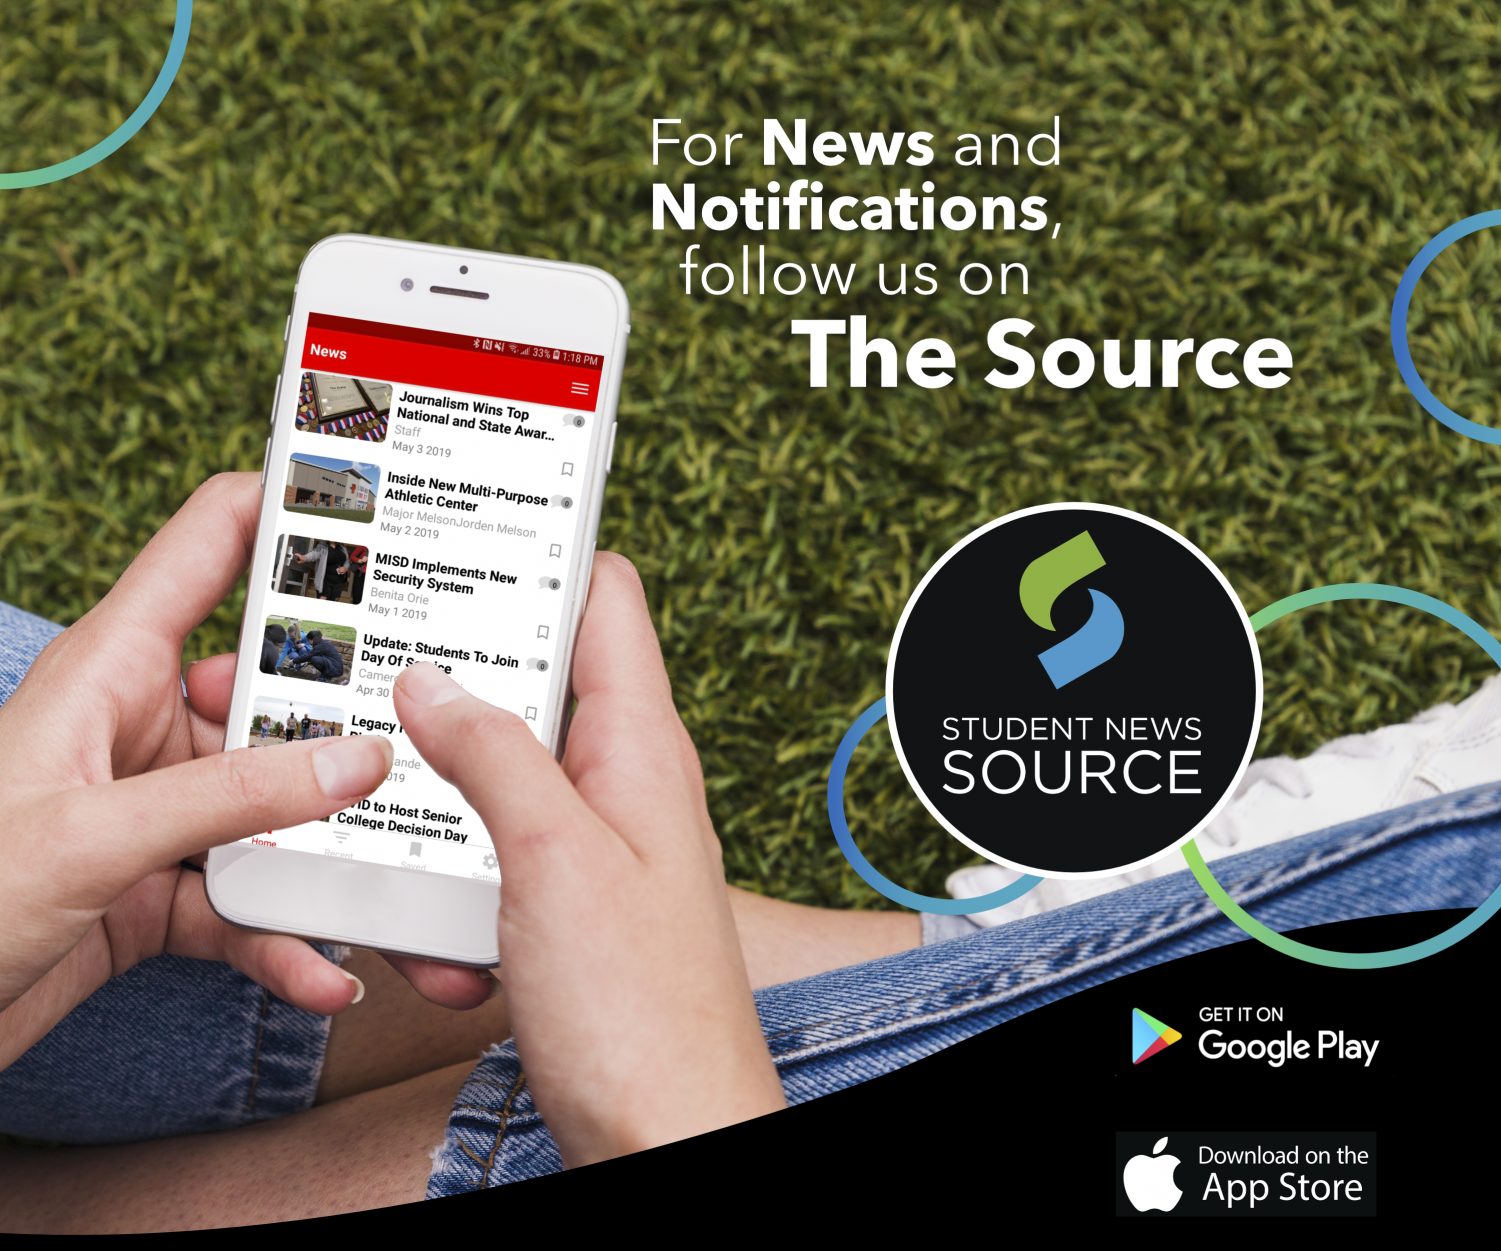 Advertisement to get The Source mobile phone app.